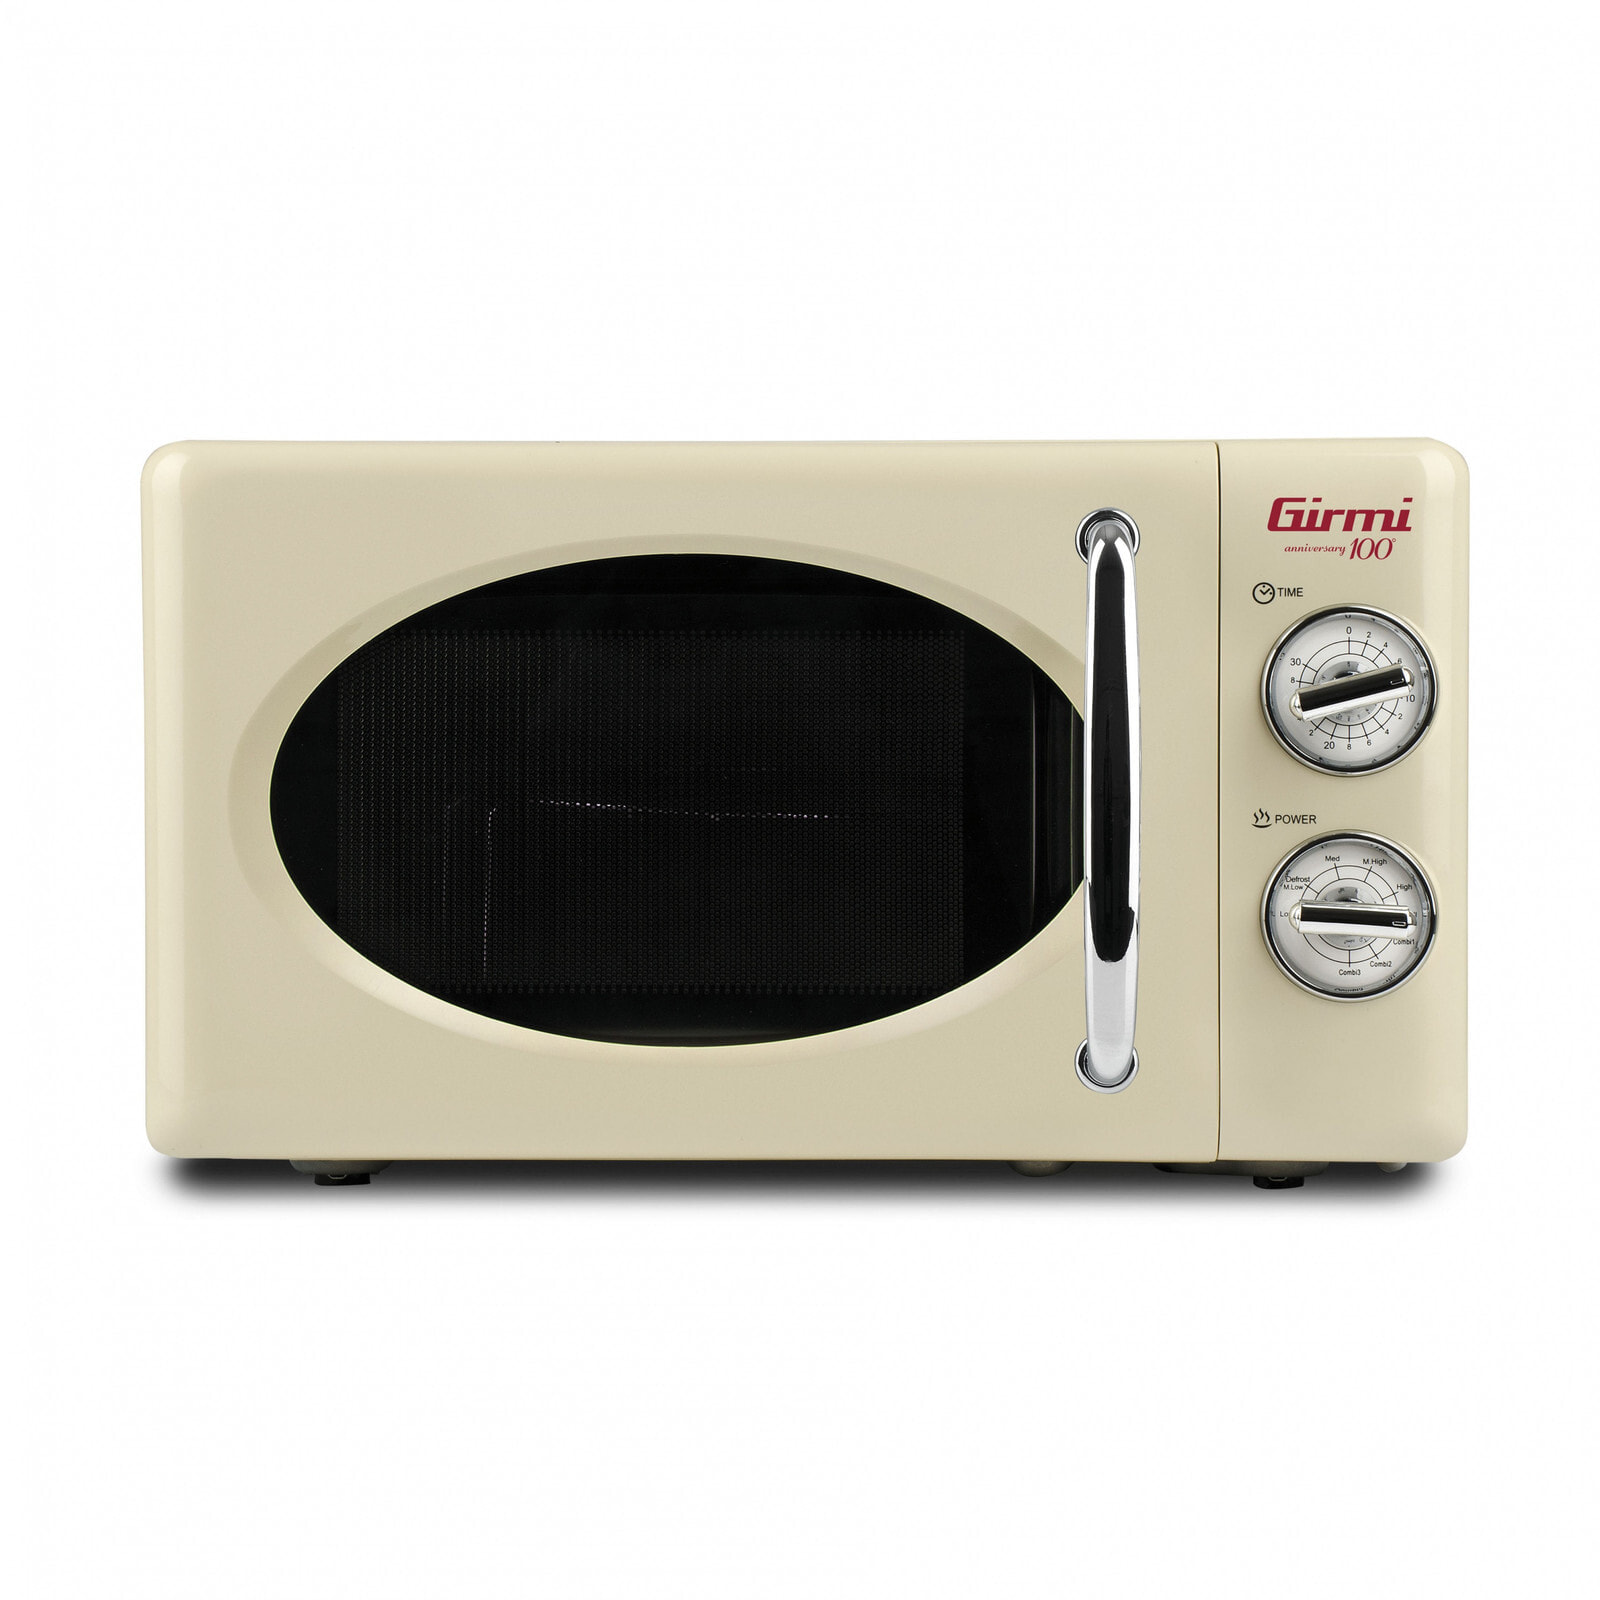 FM21 - Over the range - Combination microwave - 20 L - 700 W - Rotary - Beige